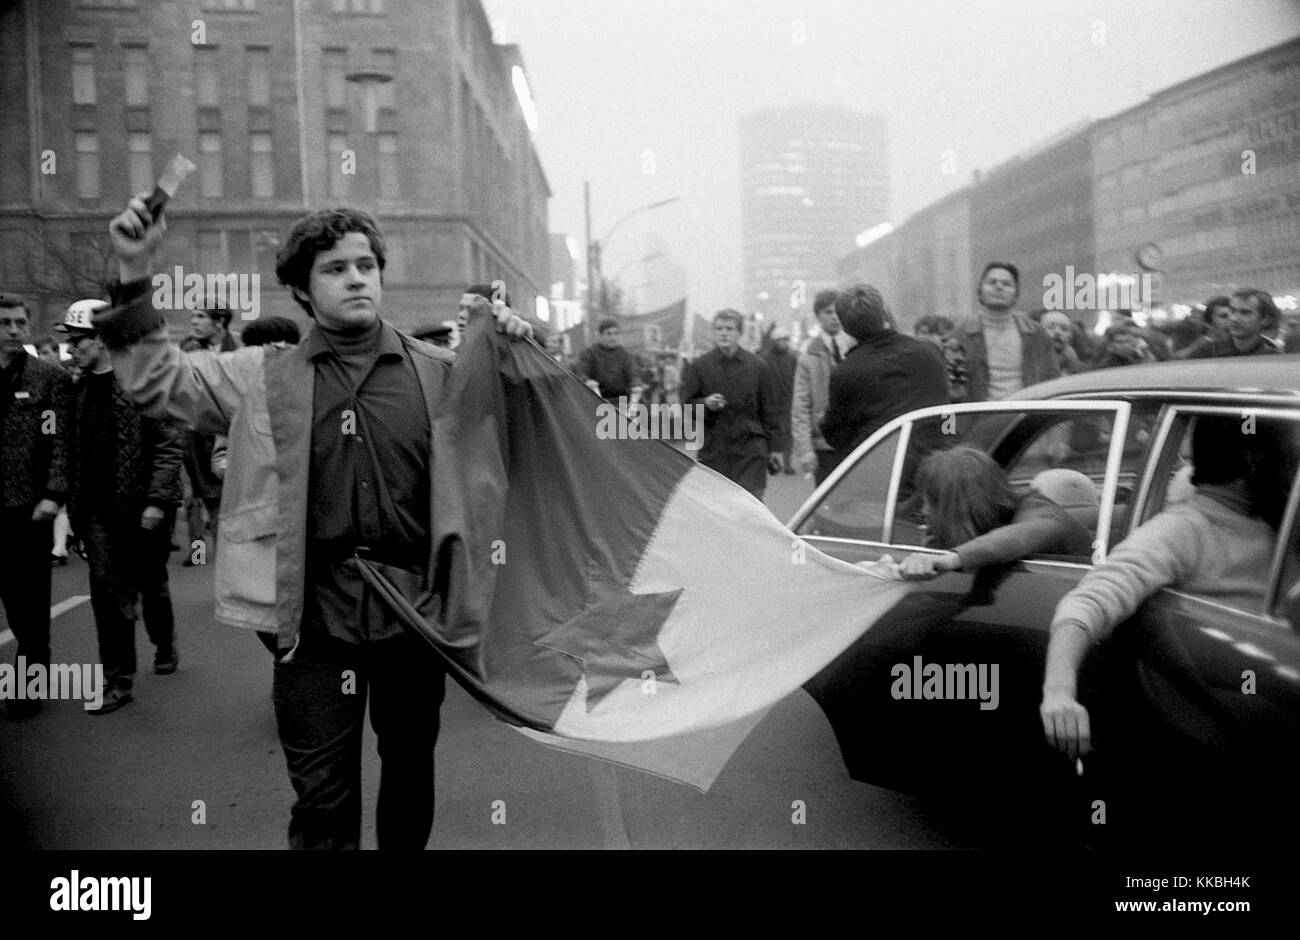 Philippe Gras / Le Pictorium -  Gathering in Berlin in 1968 -  1968  -  Germany / Berlin  -  The German demonstrations culminate on 17 and 18 February 1968. In Berlin, thousands of students from all over Europe oppose the war in Vietnam and the reform of universities. The movement is spreading to major German university cities. In 30 German cities, the student demonstrations turn to confrontation with the police. These are the Easter riots. The repression is brutal, and puts an end to massive demonstrations. The last one takes place in Bonn on May 11, 1968, and brings together a hundred thousa Stock Photo